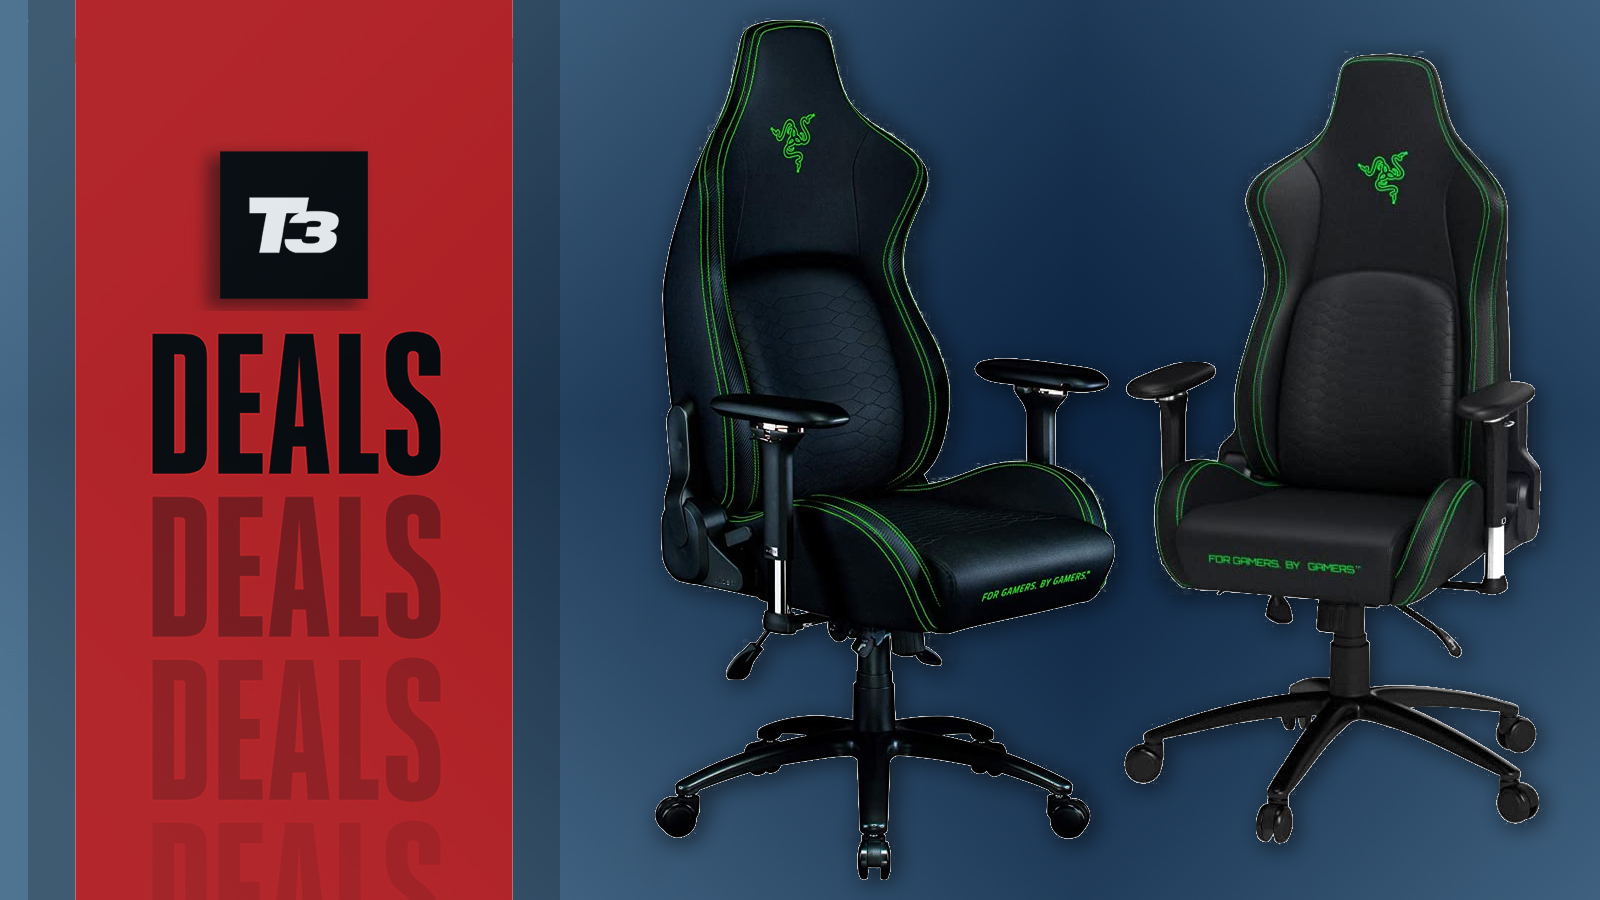 Get A Razer Gaming Chair For Cheap With This Sweet Deal At Amazon T3